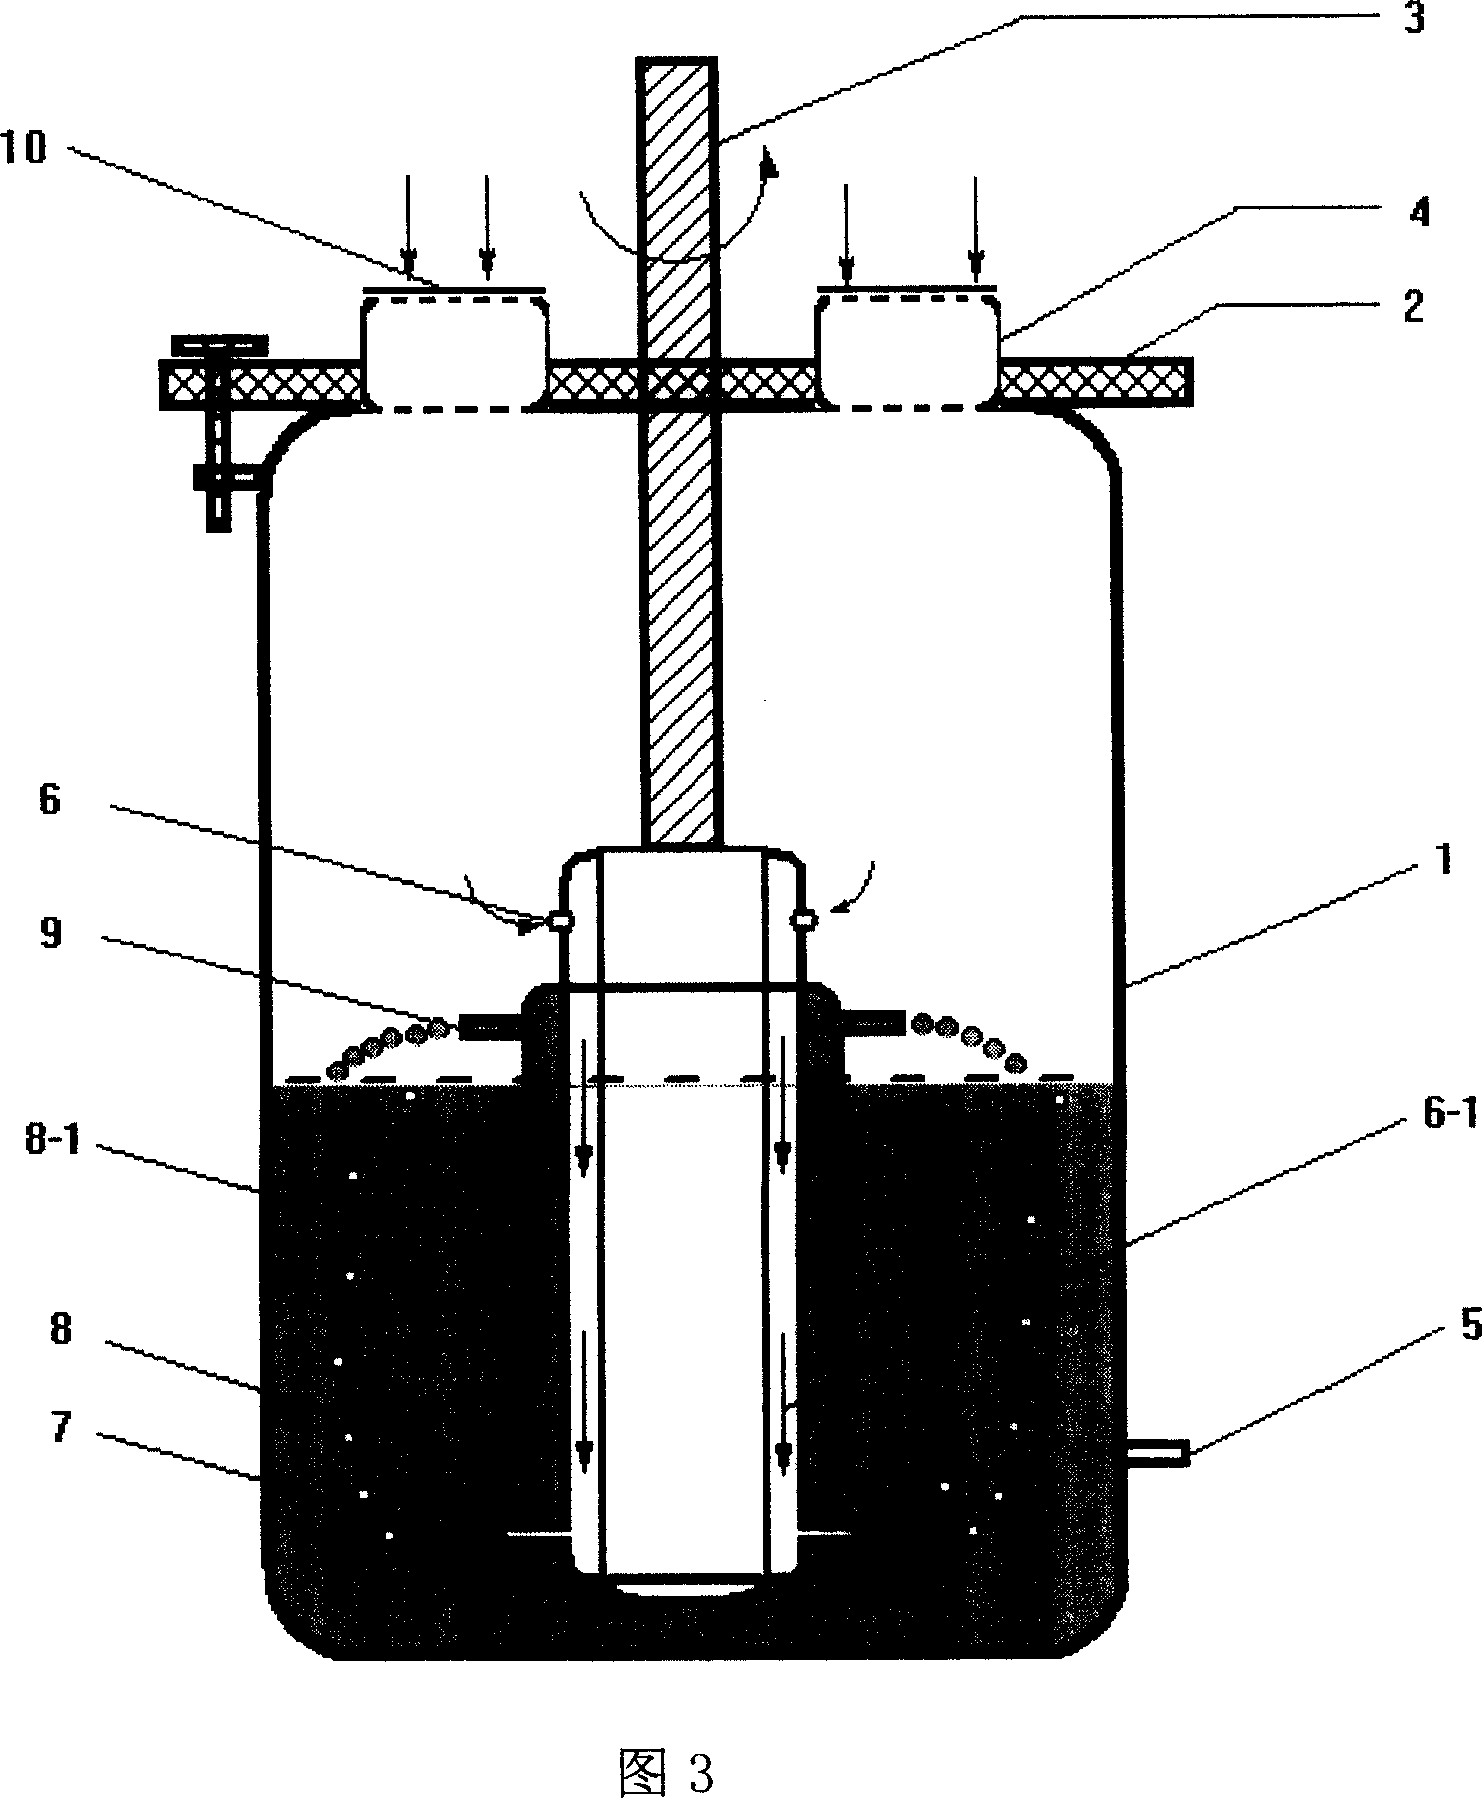 Extract-agitating self-suction type biological reactor